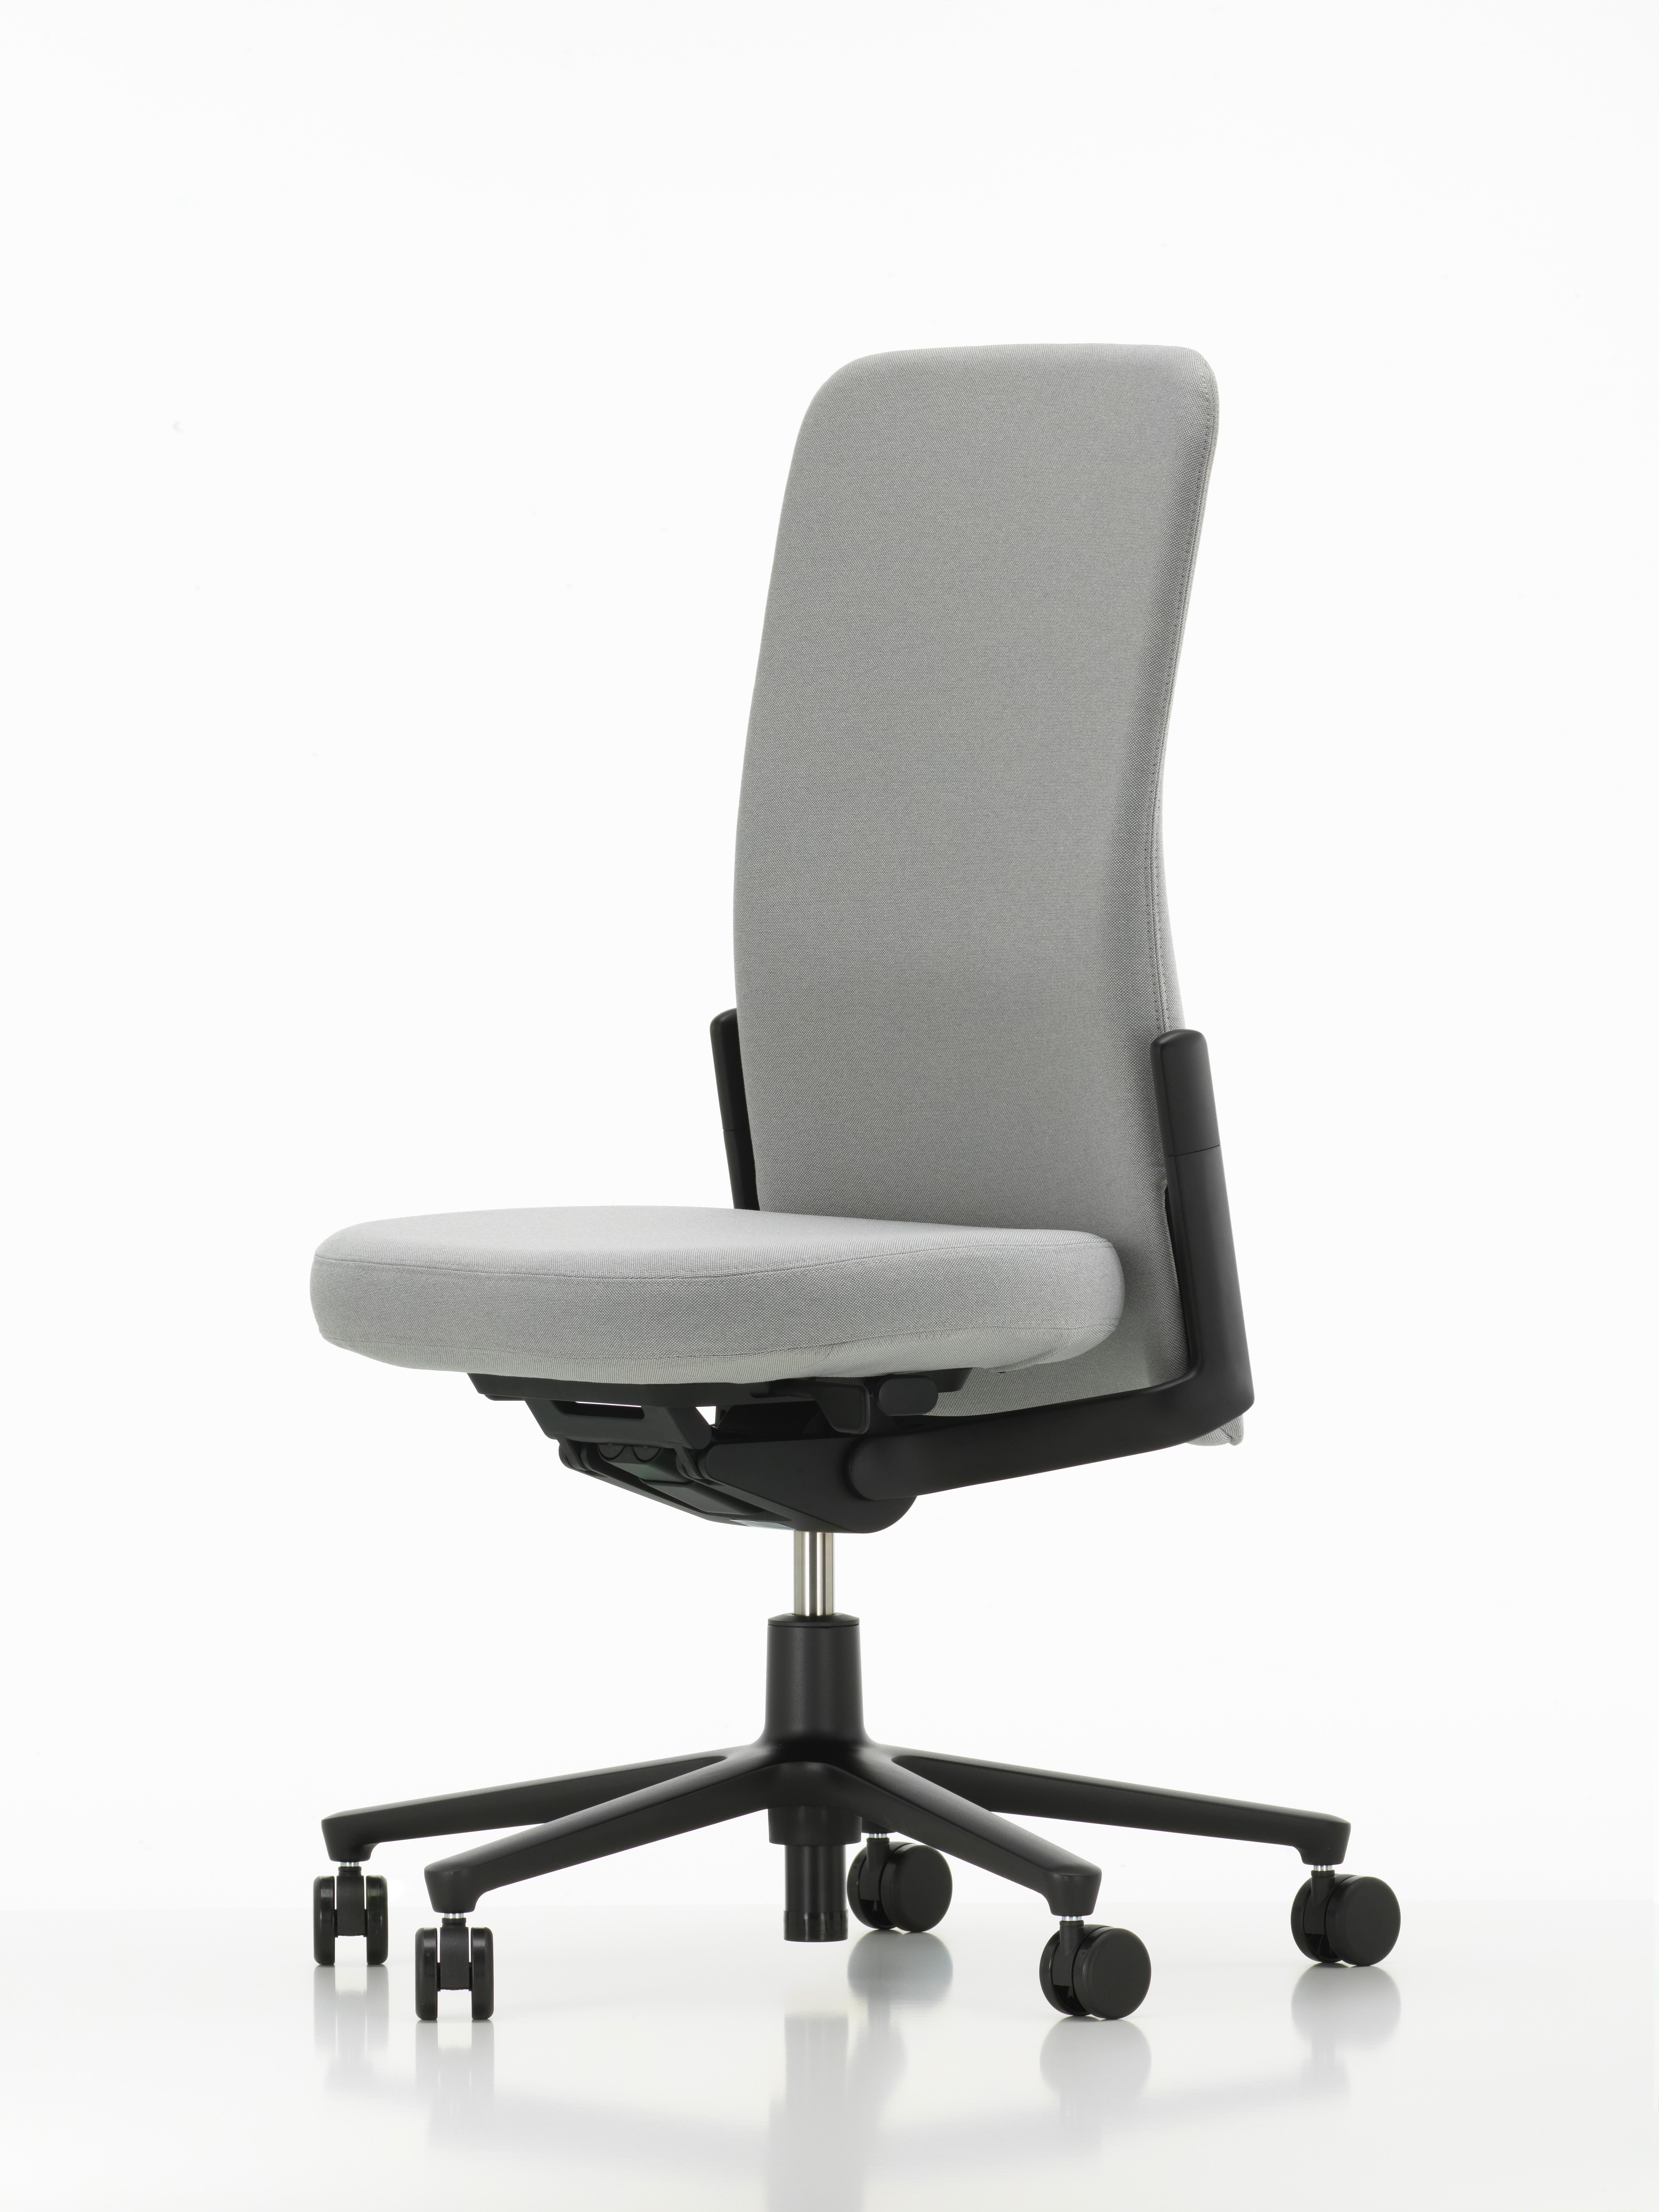 When equipped with a high backrest and adjustable neck cushion, the Pacific chair offers additional support in the upper spine. Its understated design has a distinguished aura and is therefore perfectly adapted to office environments with a